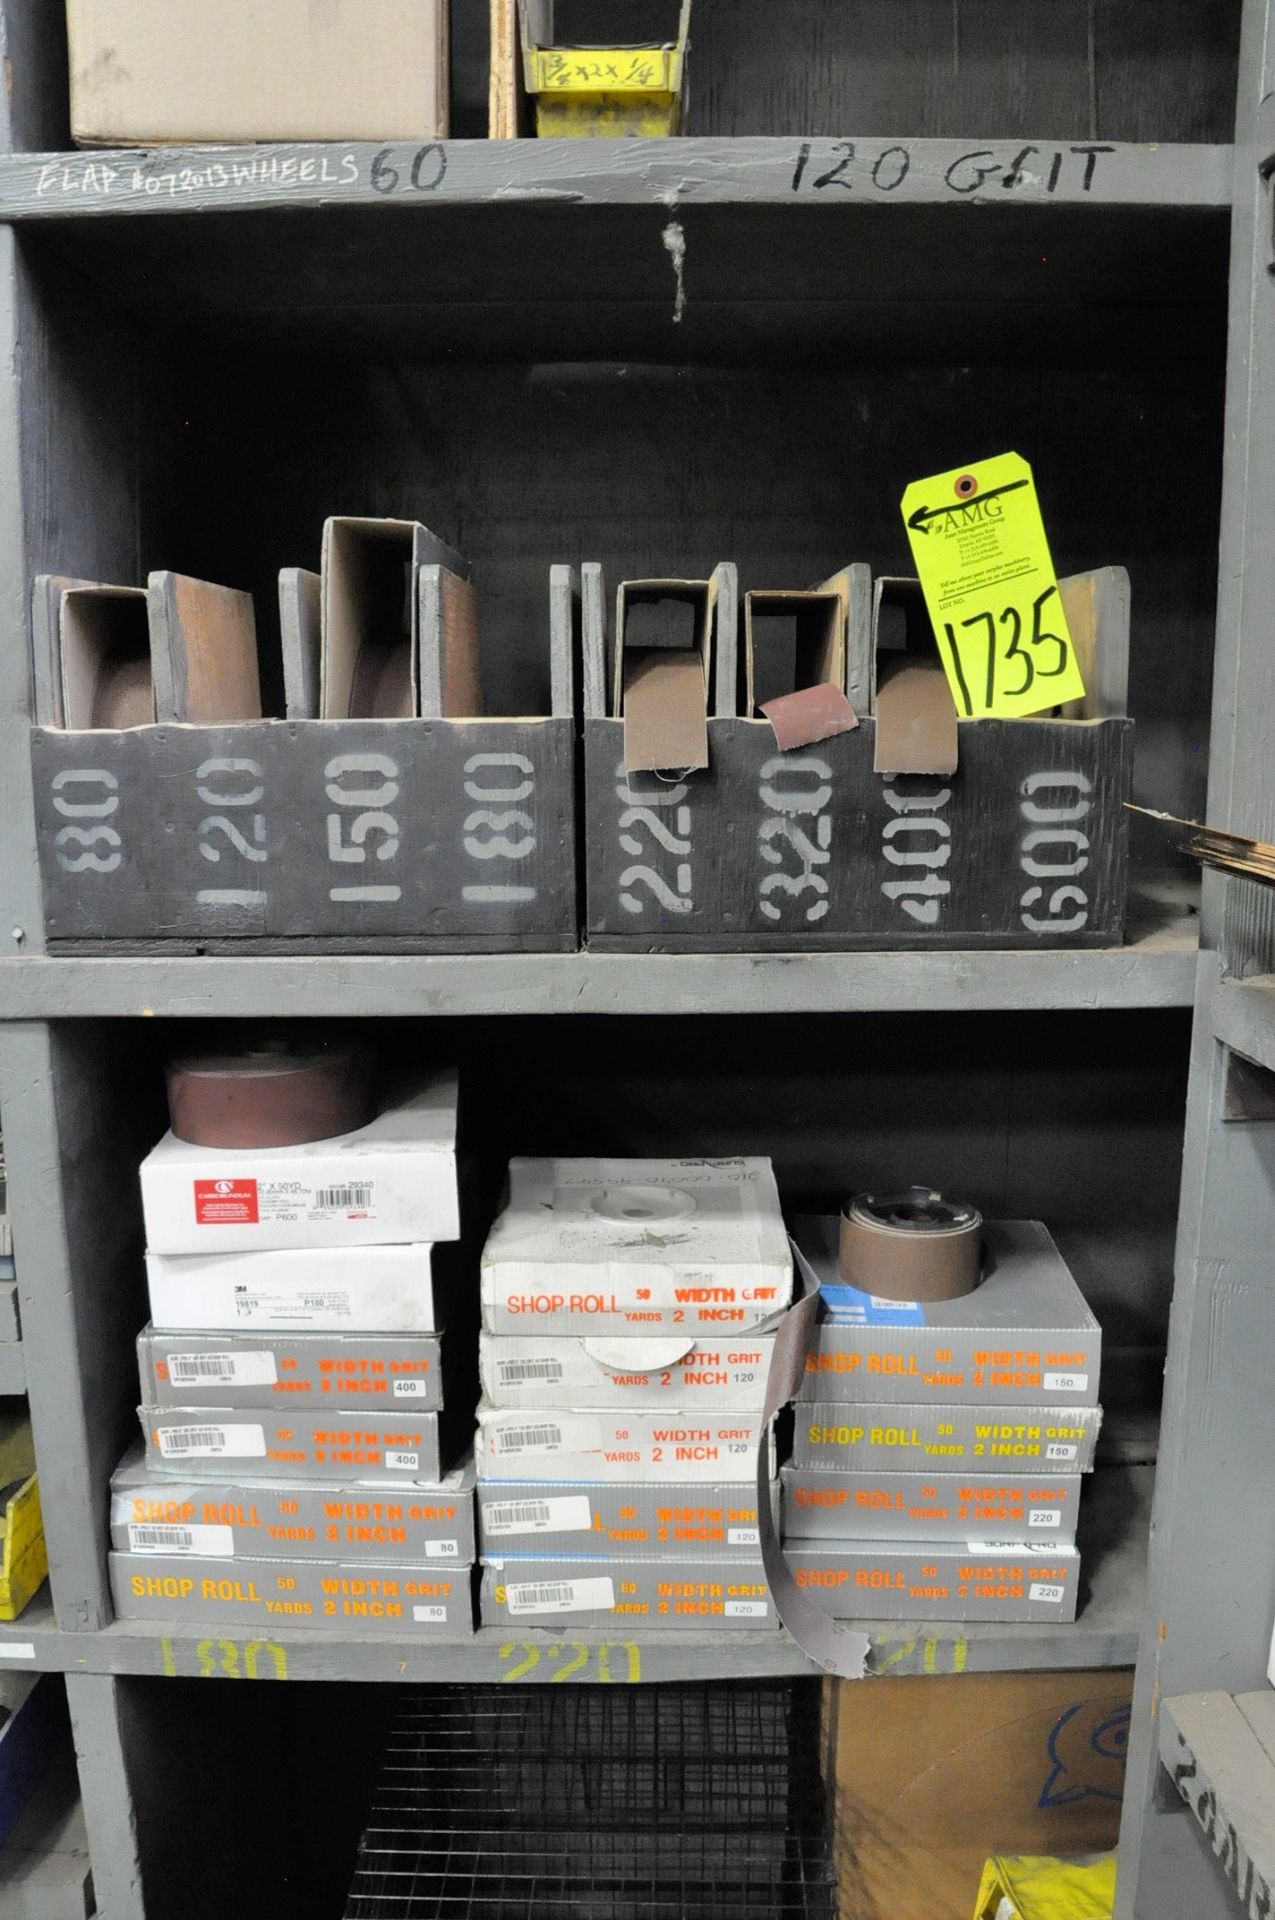 Lot-Grinding Stones, Sanding Supplies, etc. in (6) Sections and Top of Shelving Unit, (Shelving - Image 8 of 11